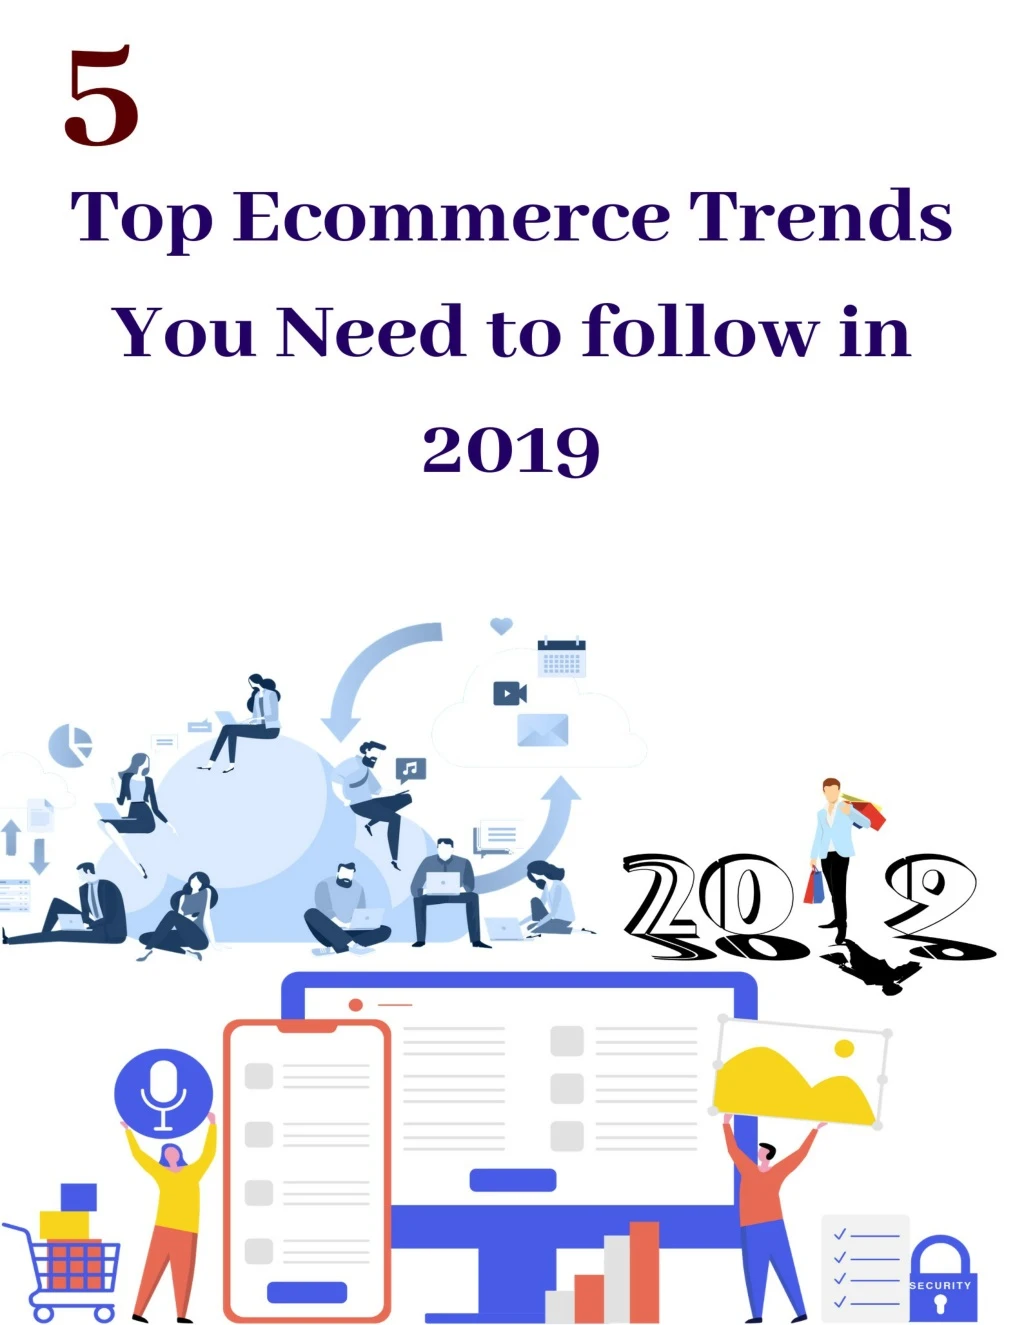 5 top ecommerce trends you need to follow in 2019